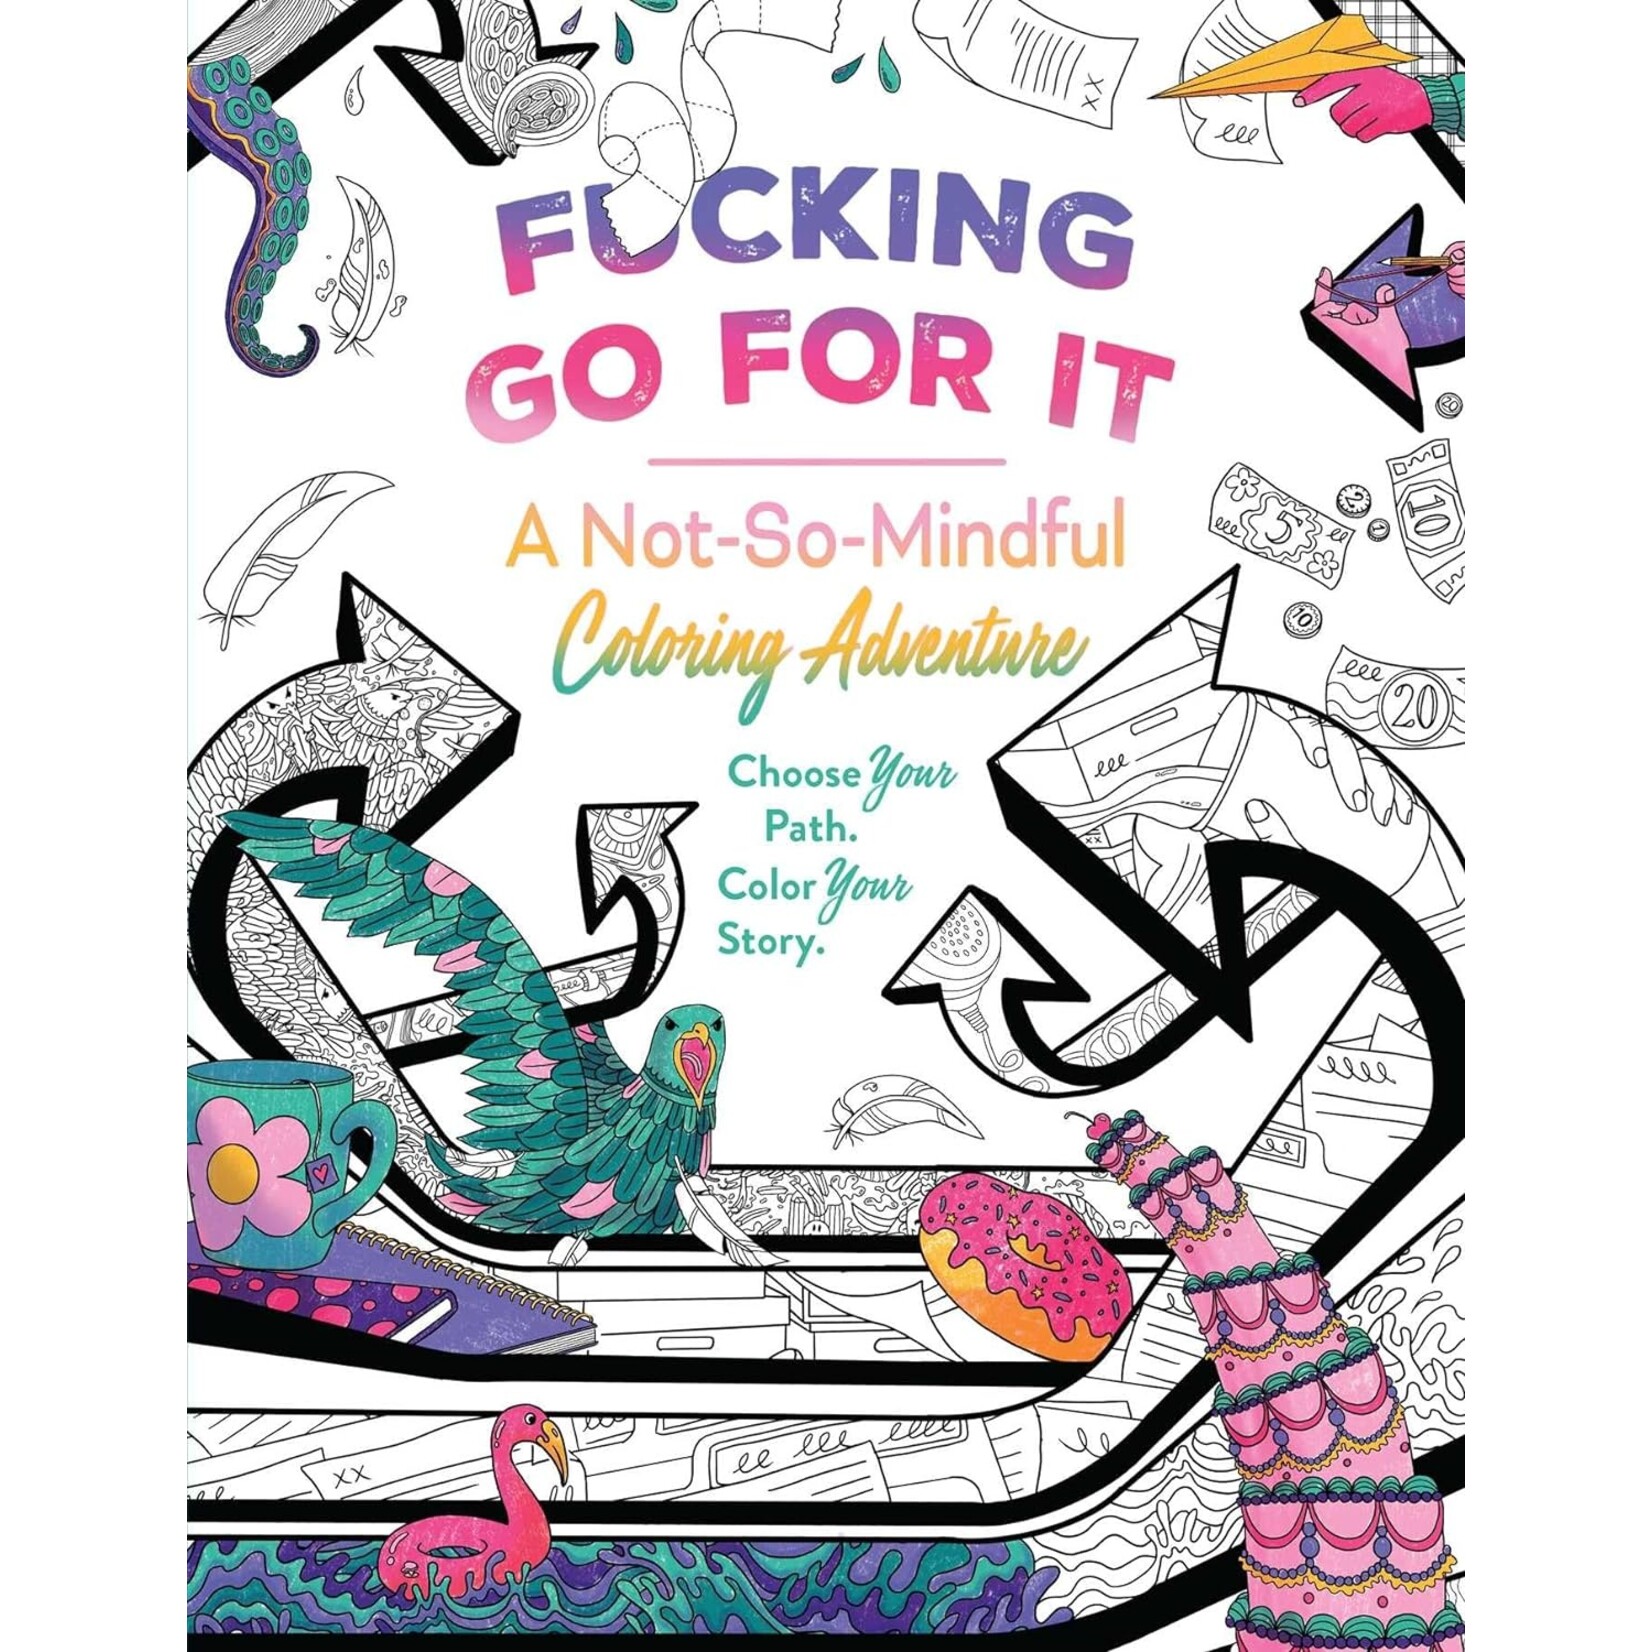 Simon and Schuster Fucking Go For IT A Not-So-Mindful Coloring Adventure